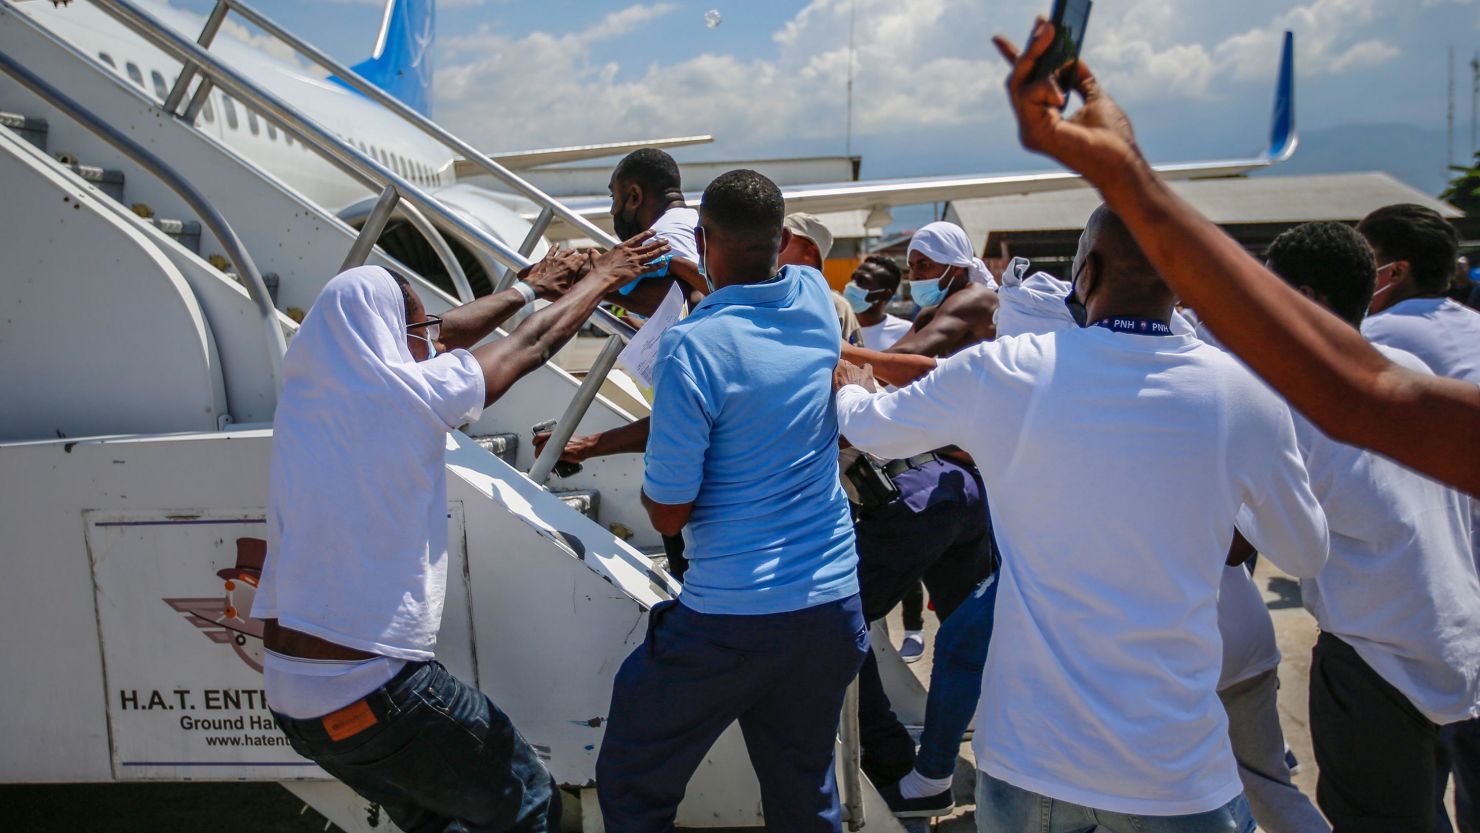 Haitians deported from the US try to board the same plane in which they were deported, at Port-au-Prince airport on Tuesday.